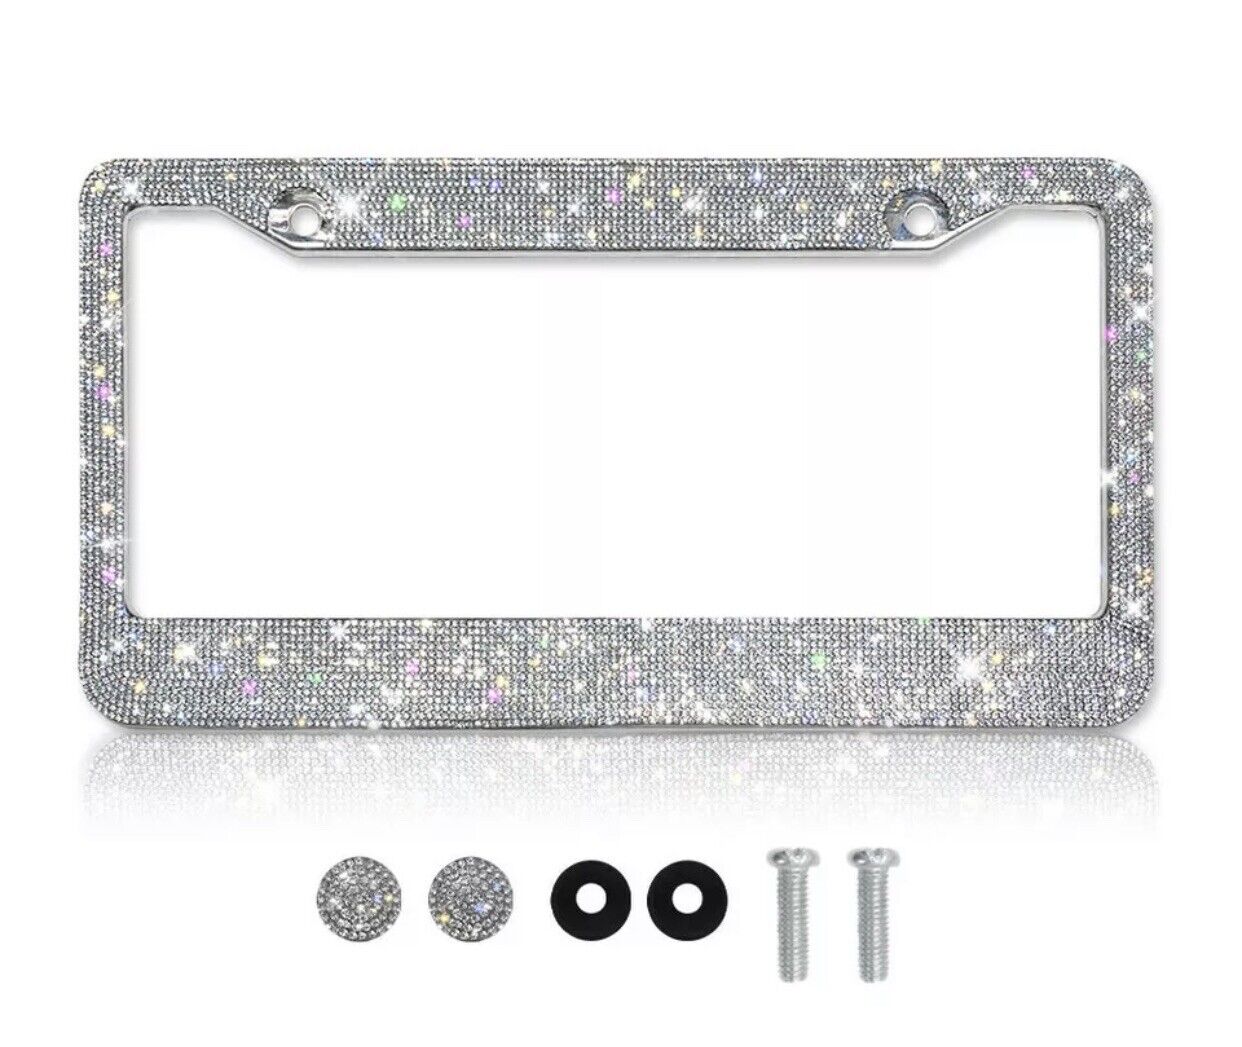 Bling Rhinestone Sparkling License Plate Frame Tag Cover Accessory Car Vehicle